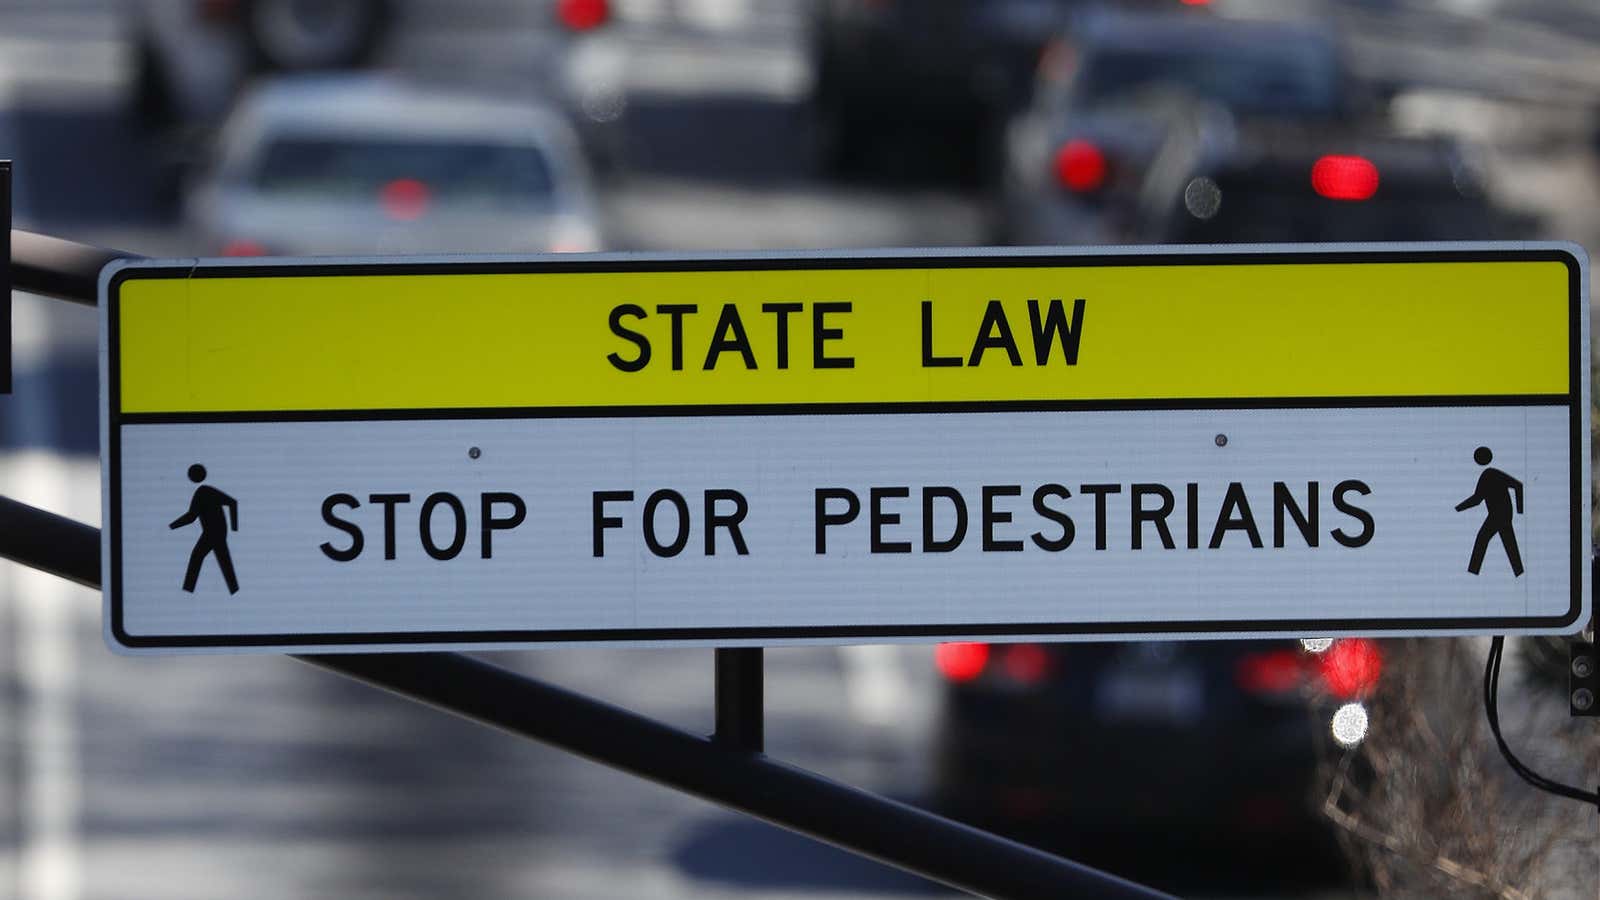 Stopping for pedestrians: An important lesson for any self-driving car.